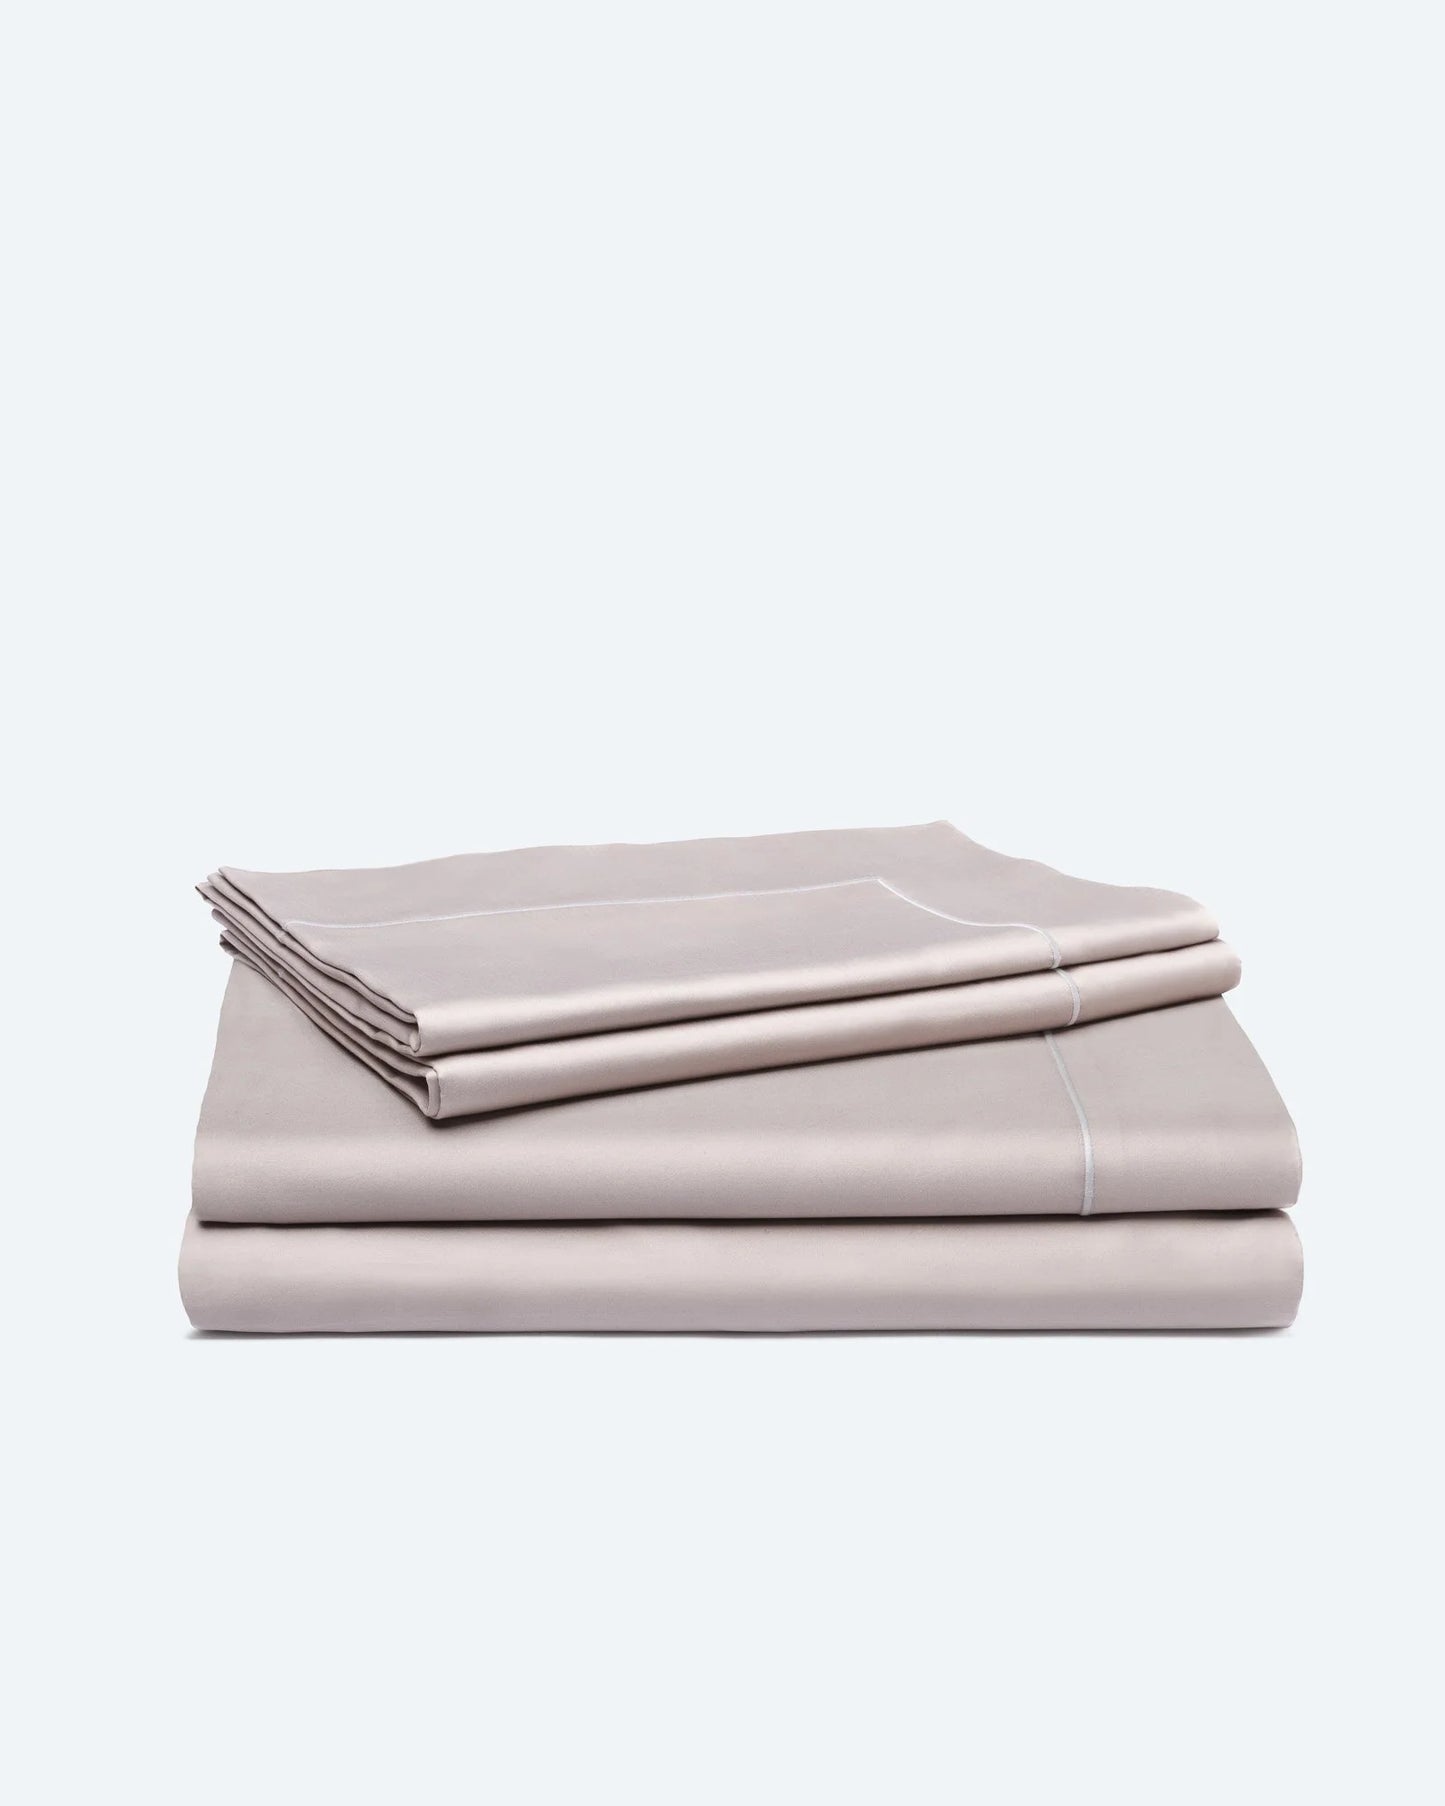 Bedding Set with Sheet Neutral Taupe Cotton Sateen